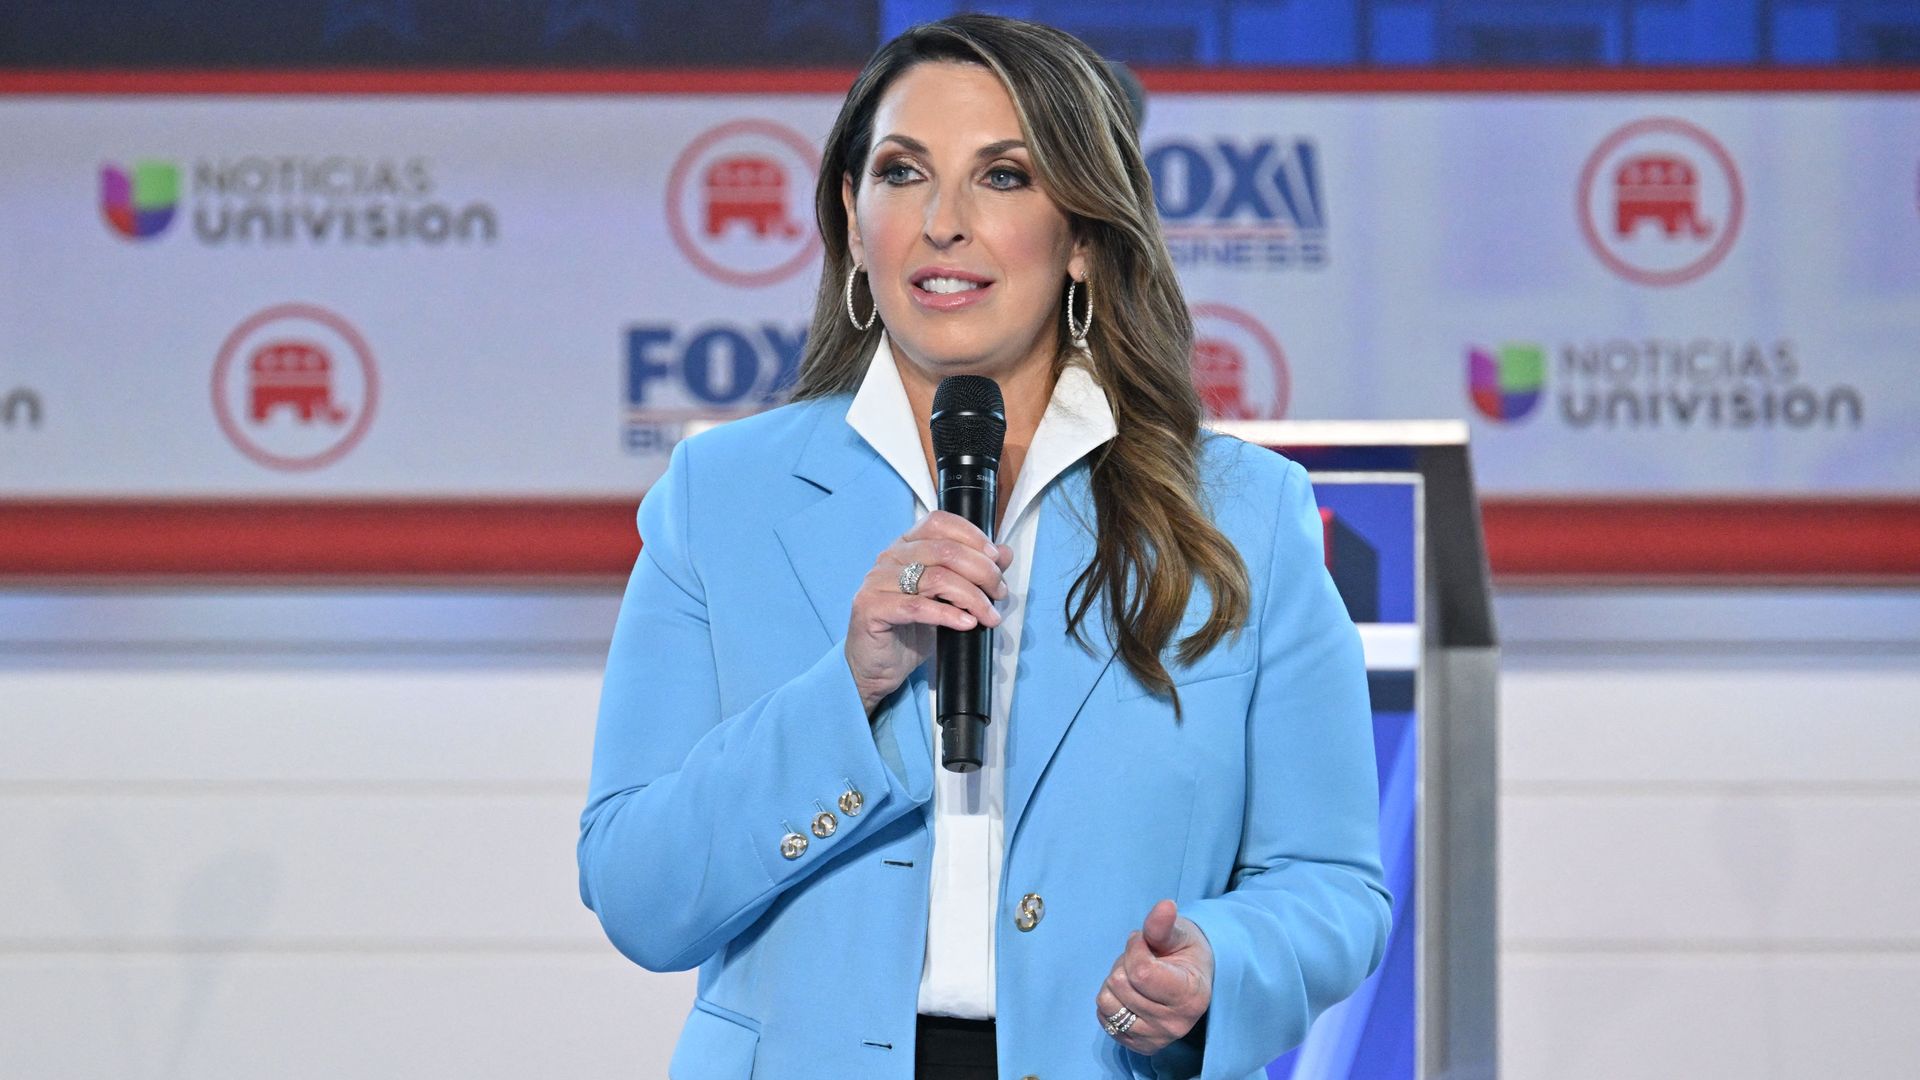 RNC chair Ronna McDaniel, in a light blue jacket and holding a microphone